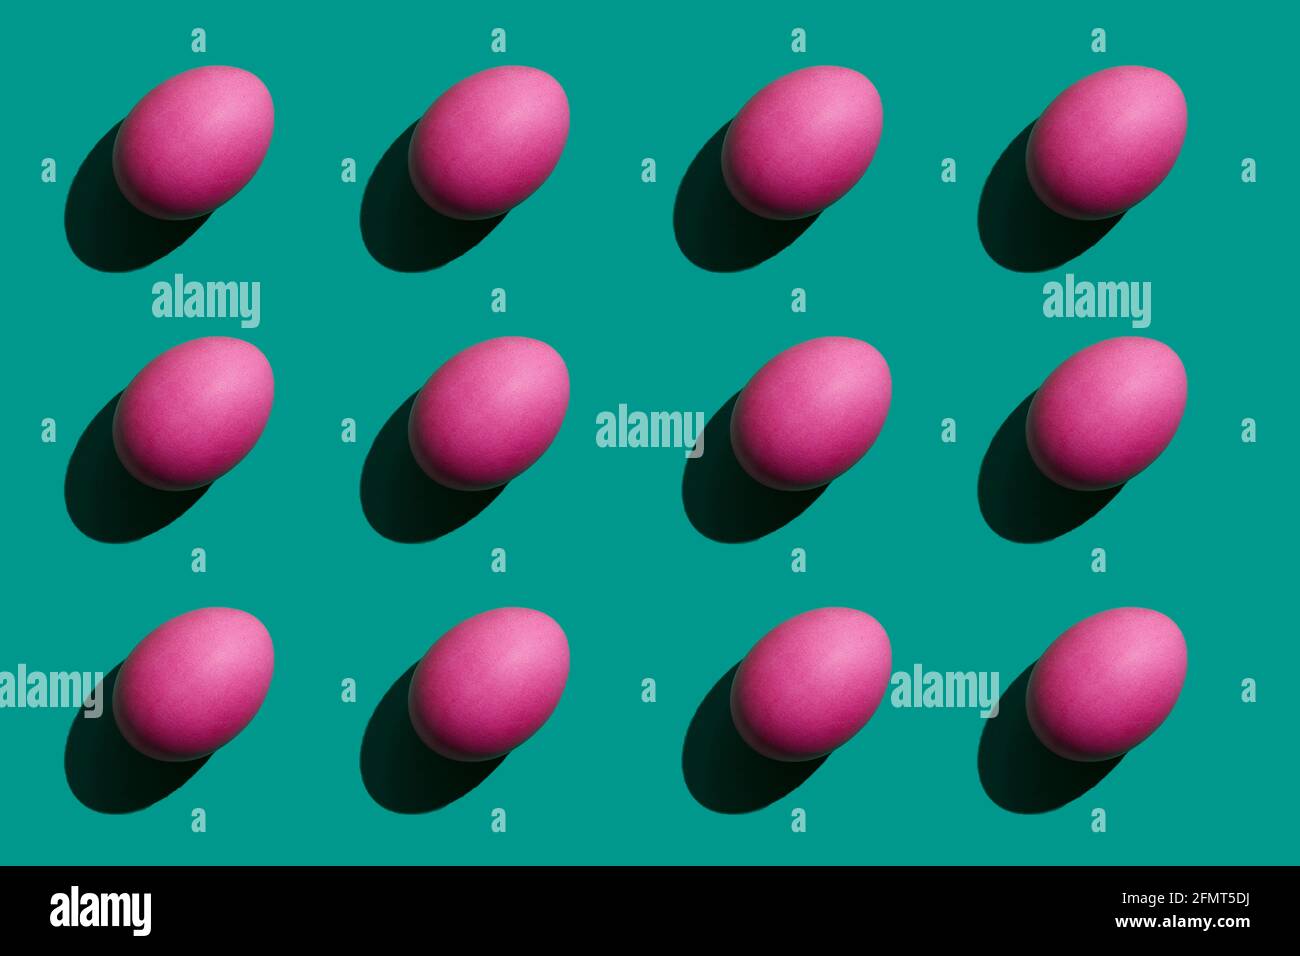 Pink eggs pattern ester background Stock Photo